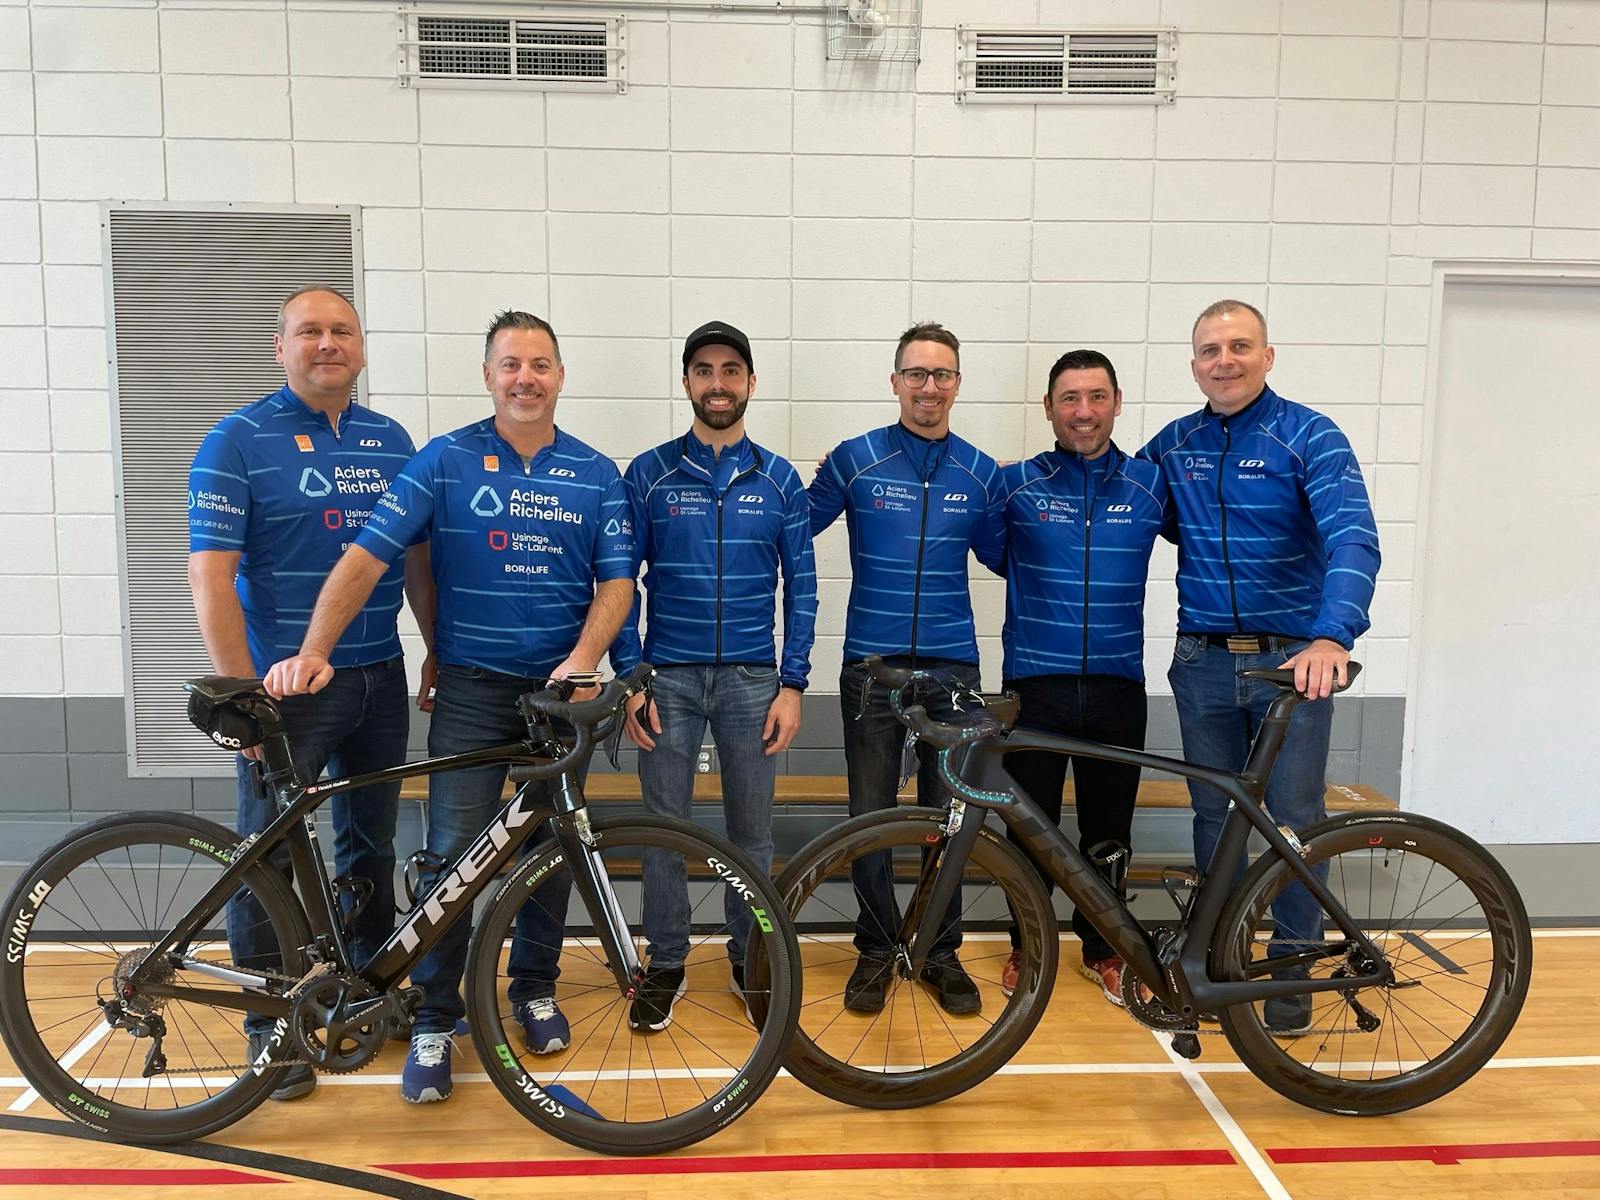 Our team of cyclists at Le Grand défi Pierre-Lavoie in 2023